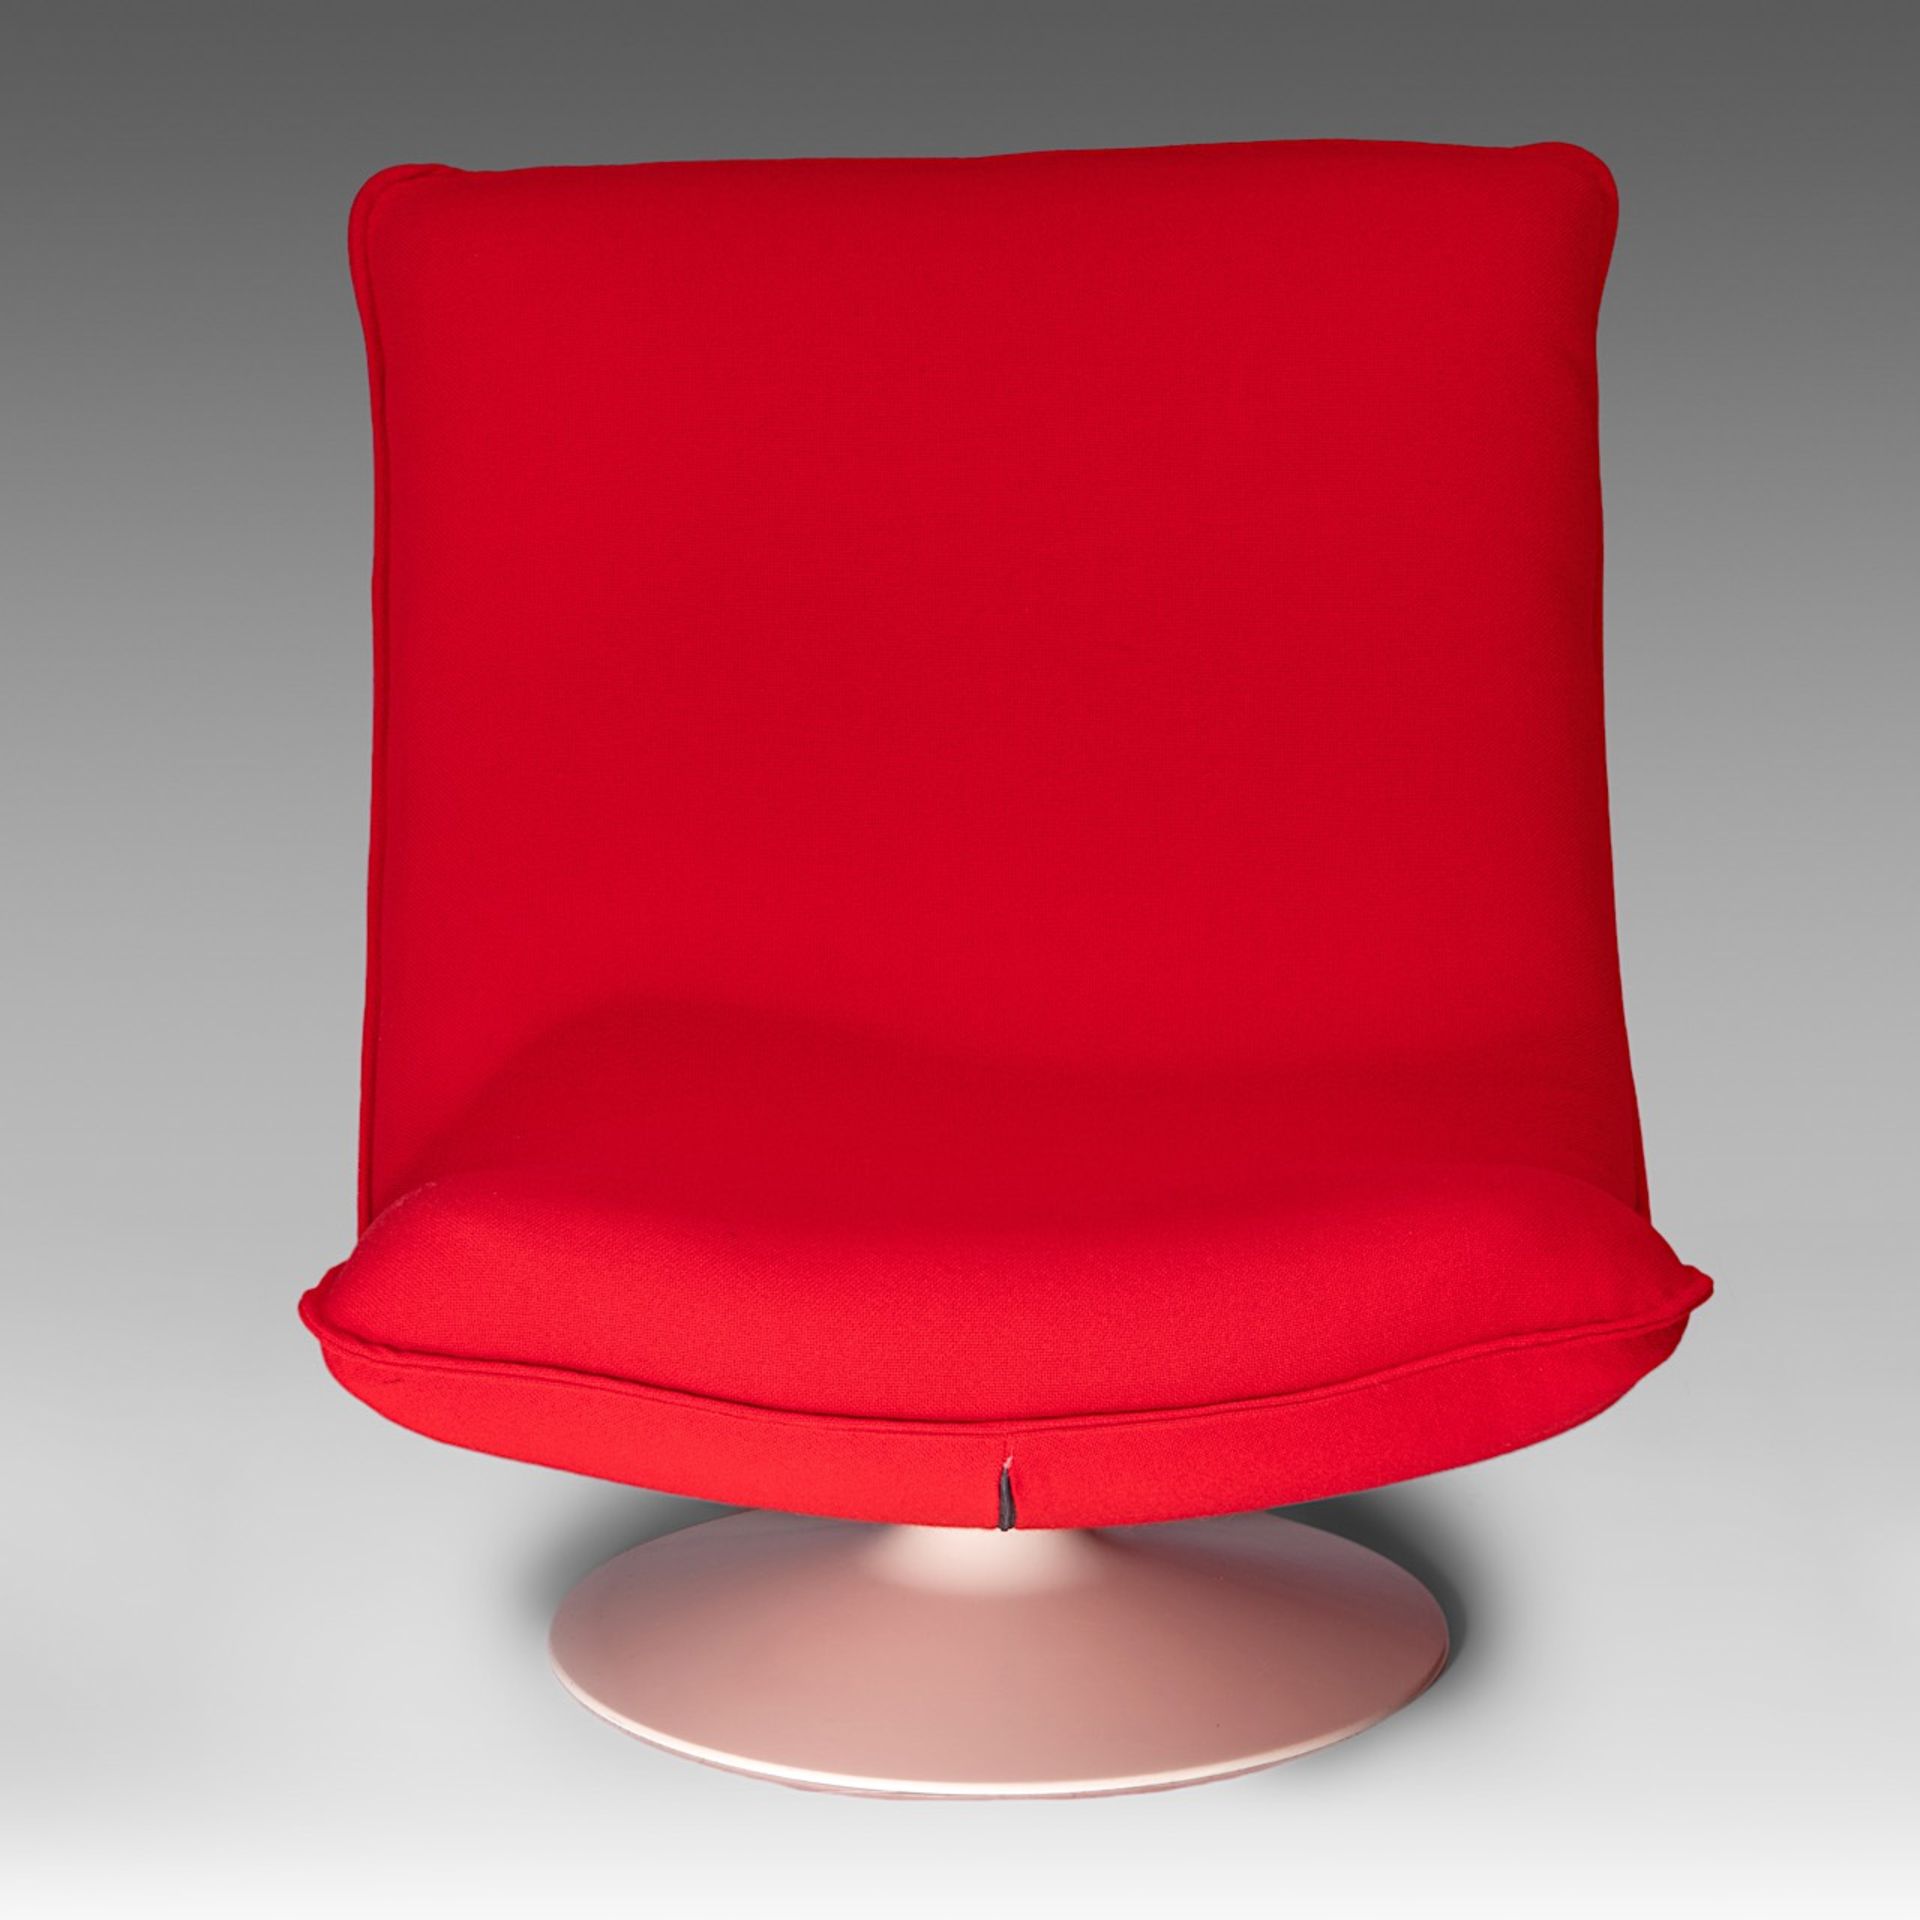 A Vintage F980 easy chair by Geoffrey Harcourt for Artifort (1970), H 82 - W 75 cm - Image 2 of 8